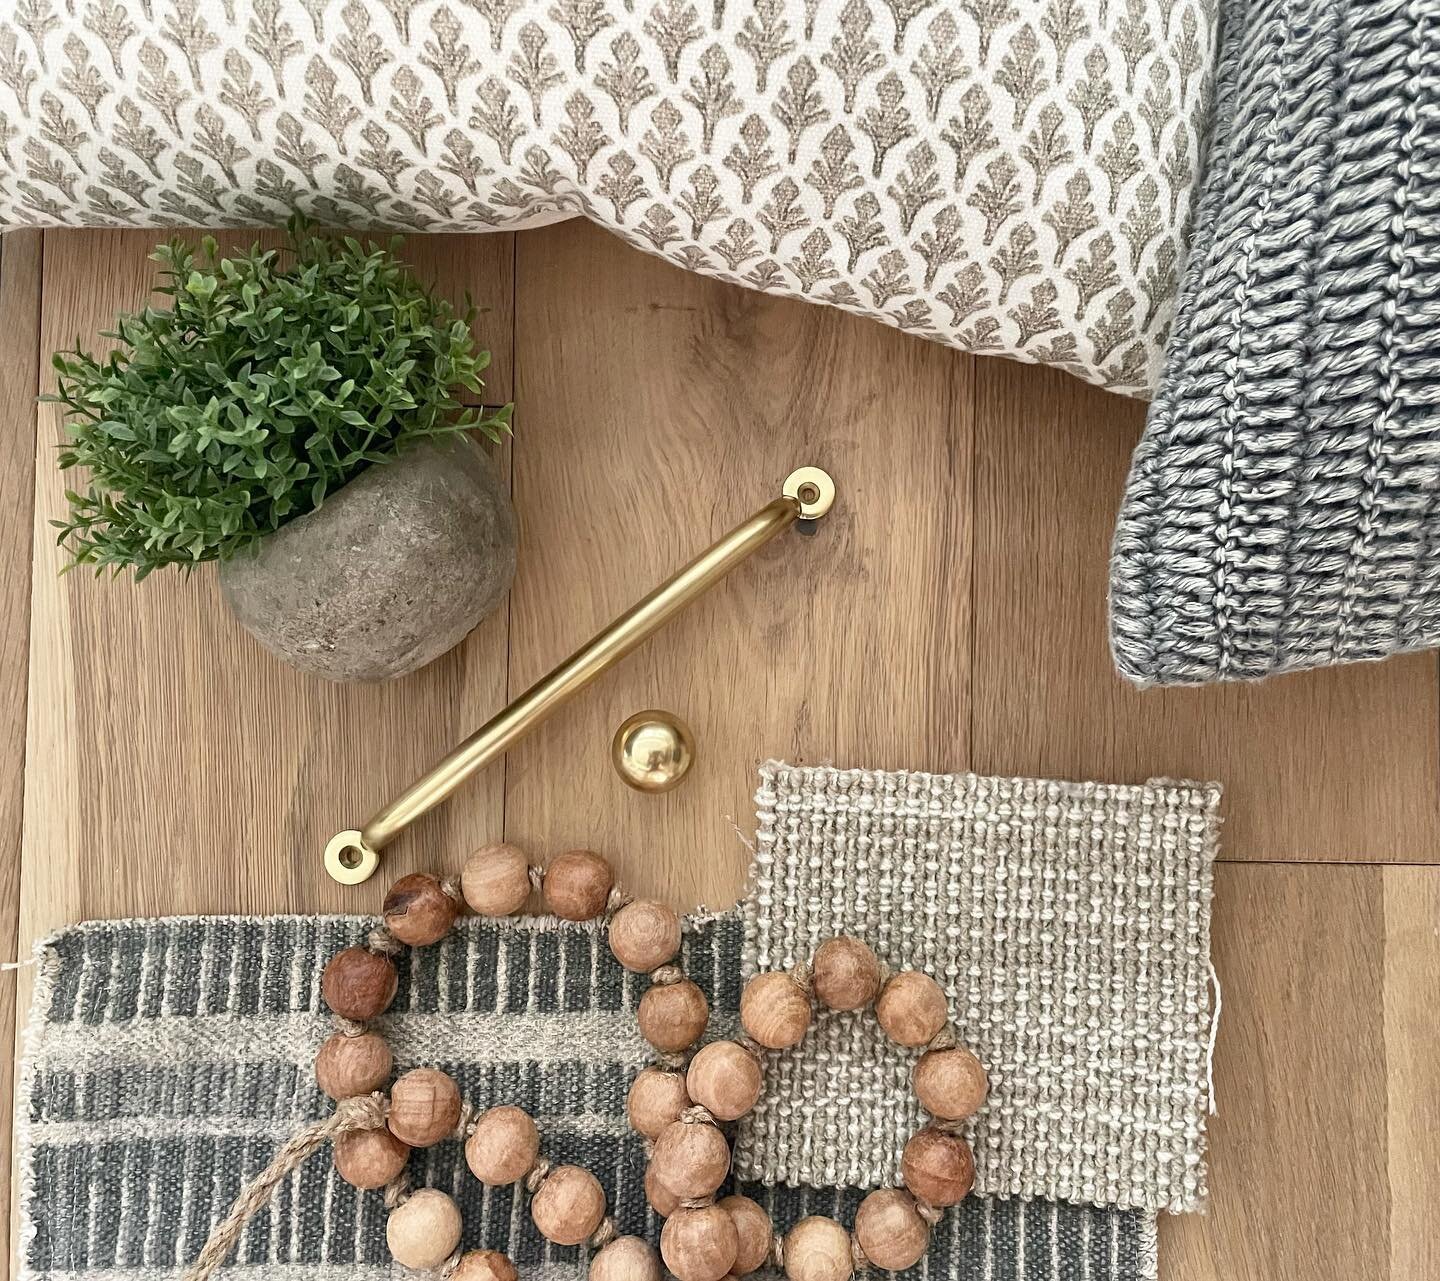 LOVE when I get to create mood boards for my own home 😏 big things happening over at the atkinson house this spring to make our own house, our home 🤍

#humbleabodedesignco 
#refreshrestorerenew 
#mysmphome 
#neutraldecor 
#hometohave 
#mybeautifulh